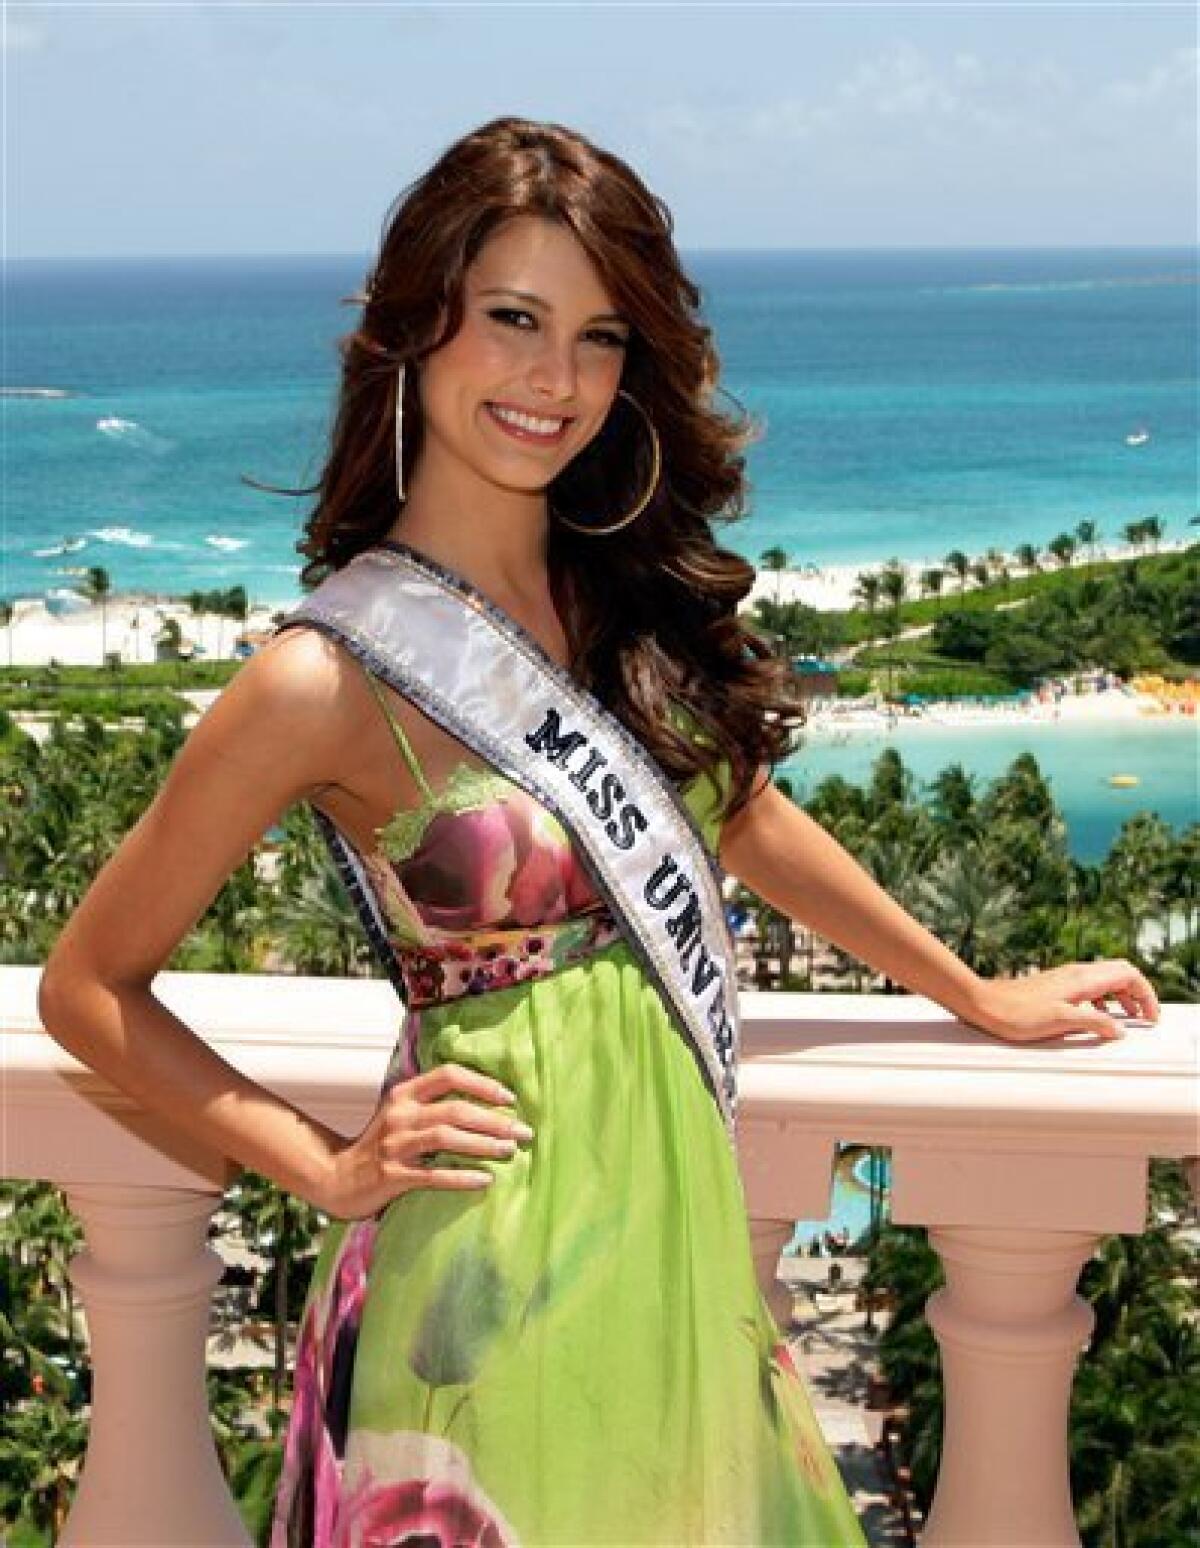 Miss Universe 2009 Stefania Fernandez, of Venezuela, poses at the Atlantis Resort in Nassau, Bahamas, Monday, Aug. 24, 2009. Venezuela won the 2009 Miss Universe crown for the second year straight and the sixth time since the pageant's creation. (AP Photo/Andres Leighton)